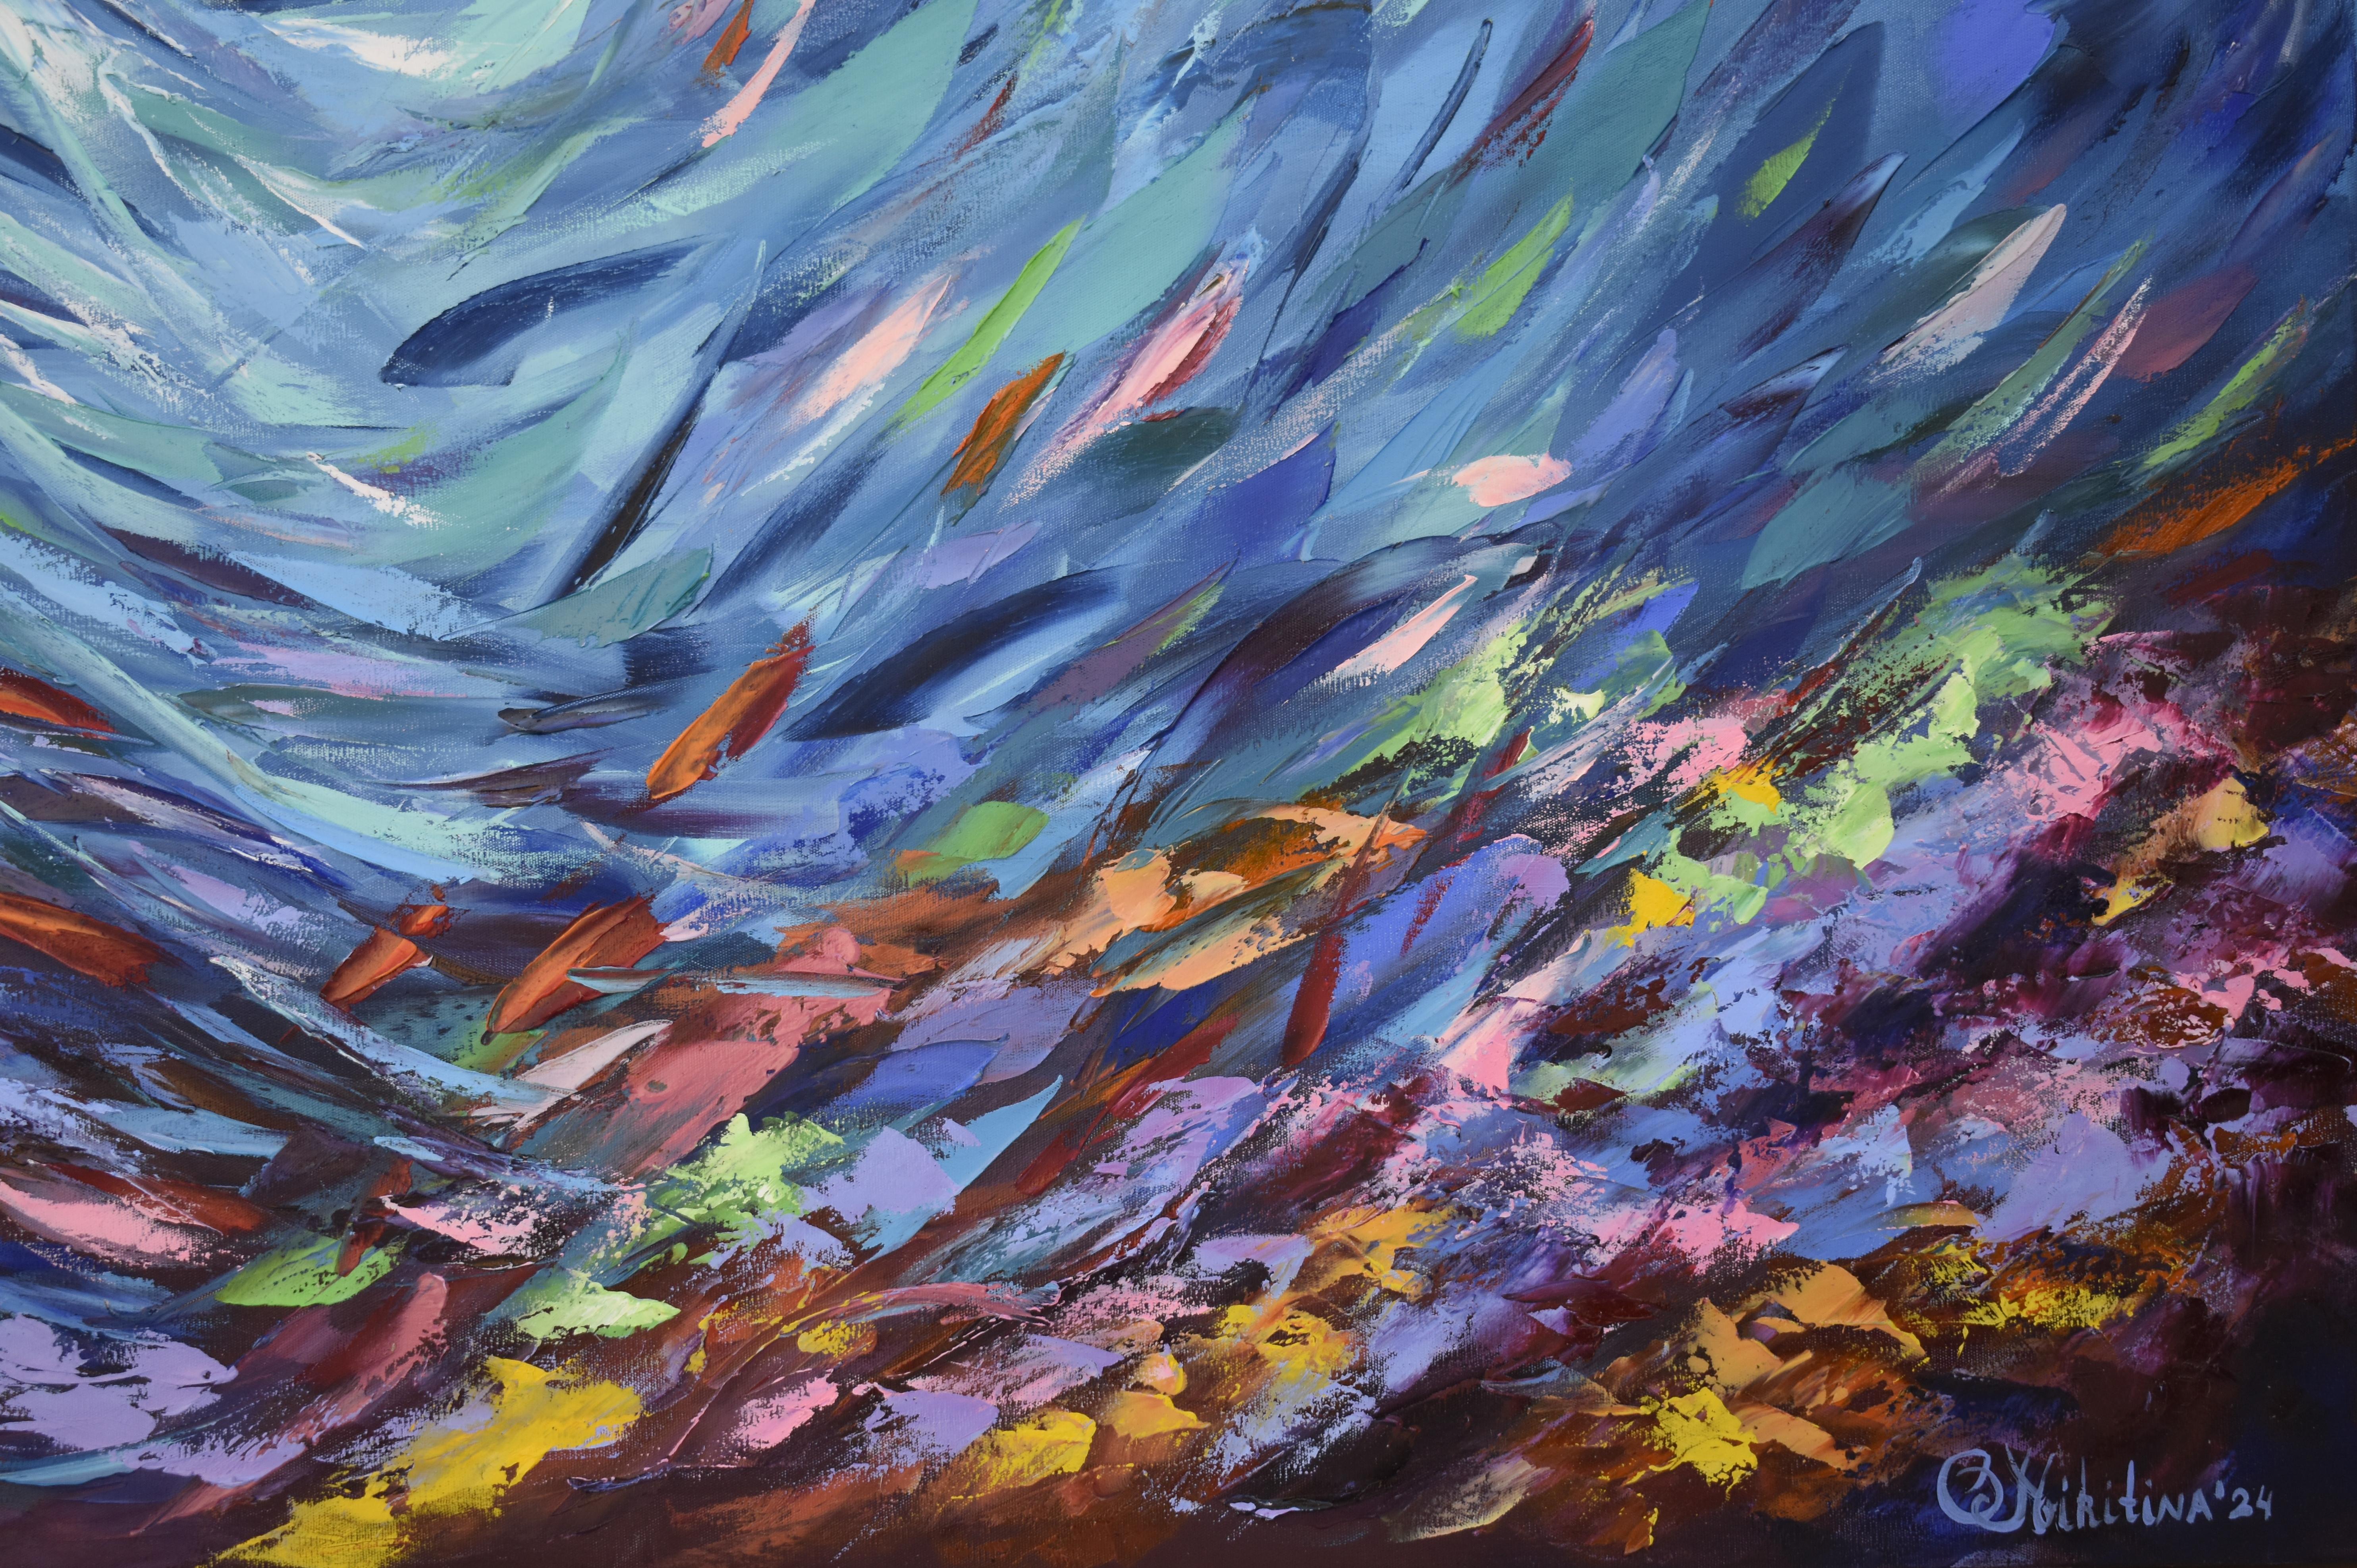 Coral Reef Painting by Olga Nikitina
Title: Coral Reef
Size:85x60cm
Materials: Oil, Stretched Canvas, Palette Knife
Shipping: gallery standards packaging, Express Shipping with tracking number.

This captivating oil painting on canvas by Olga